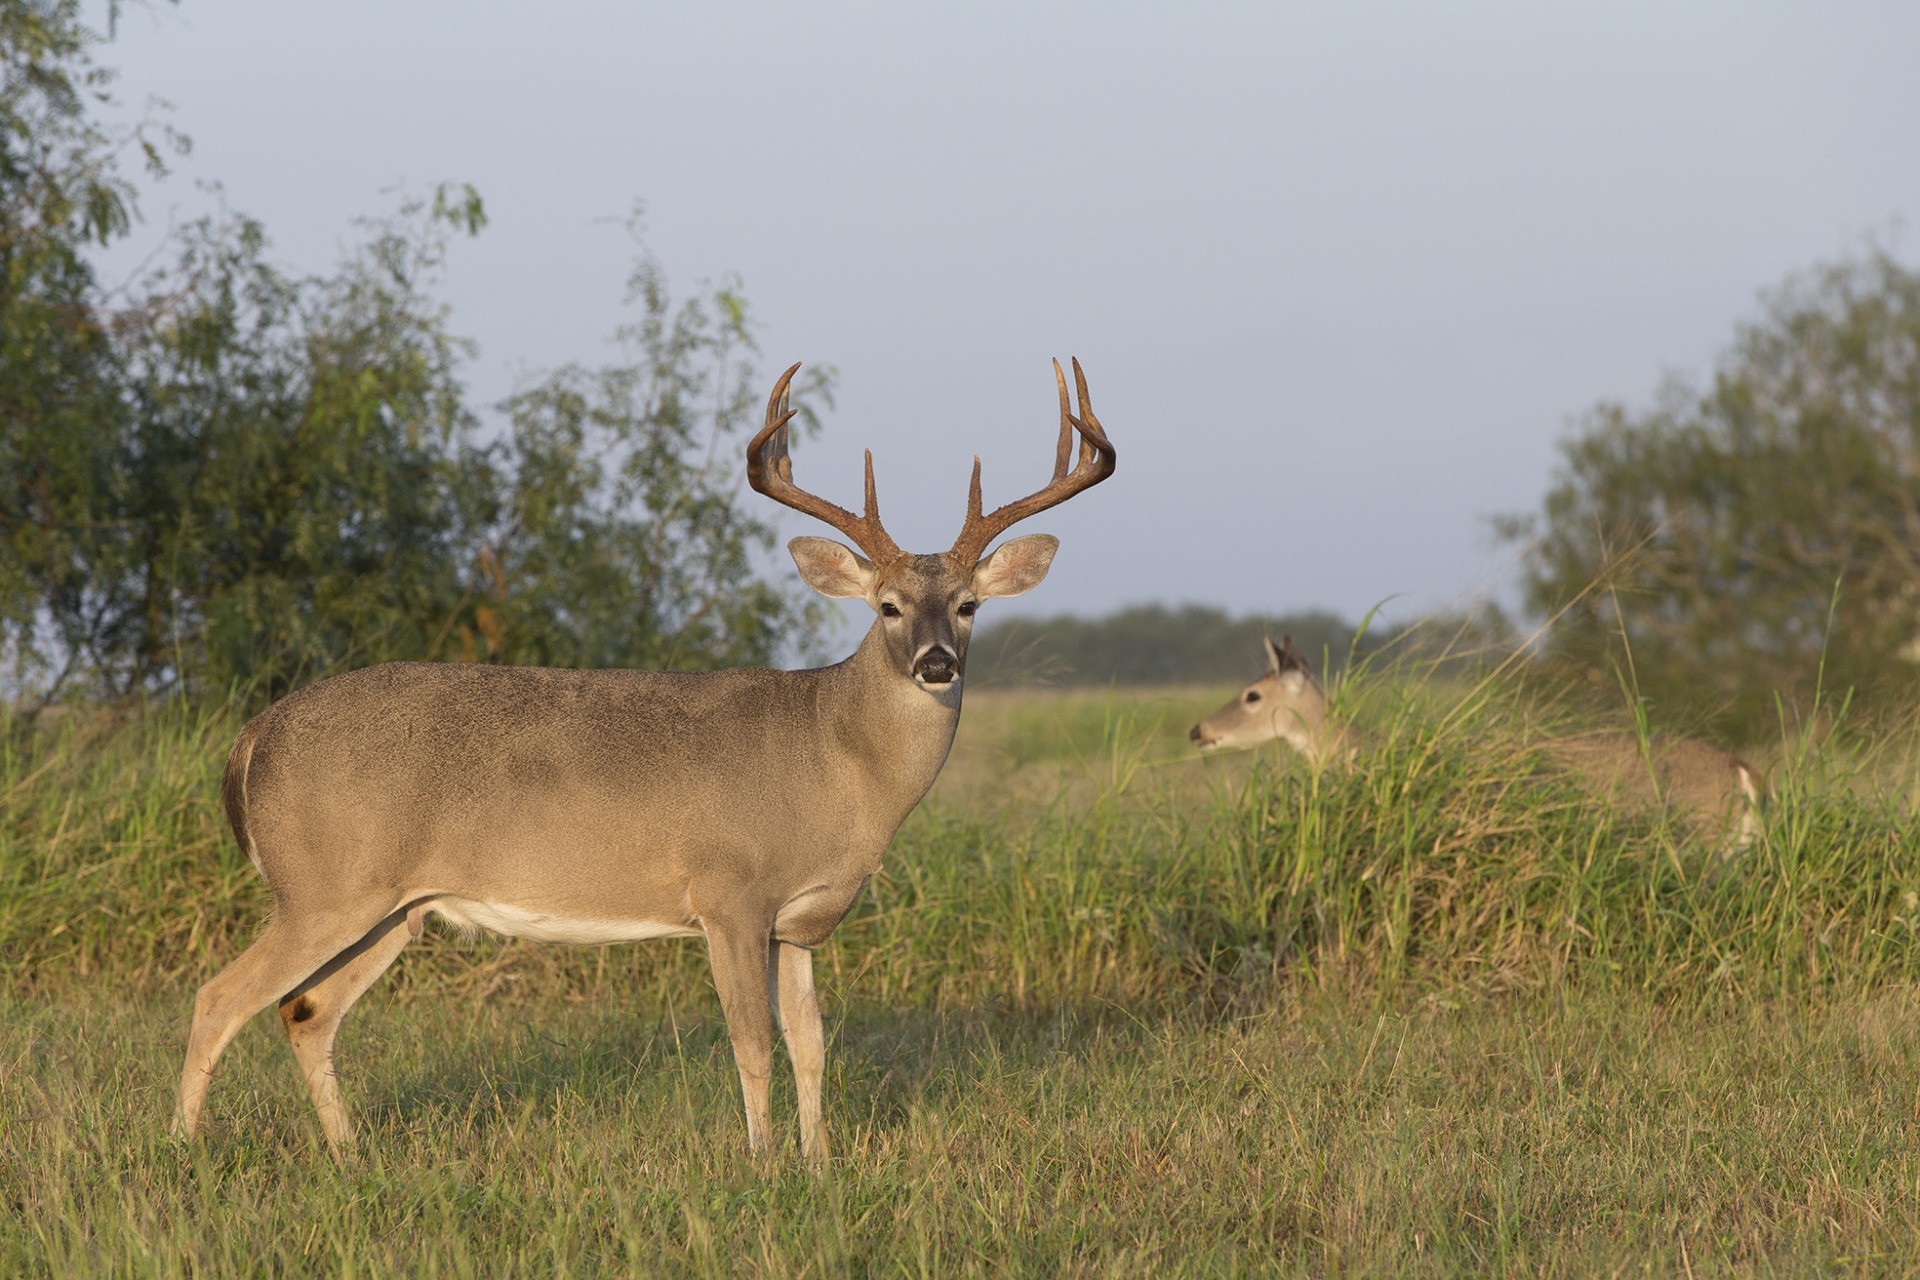 Hunters Prepare For Opening Day Of Deer Season. Agrilife Extension Wildlife Specialist Shares-Whitetail Rut In Texas 2021